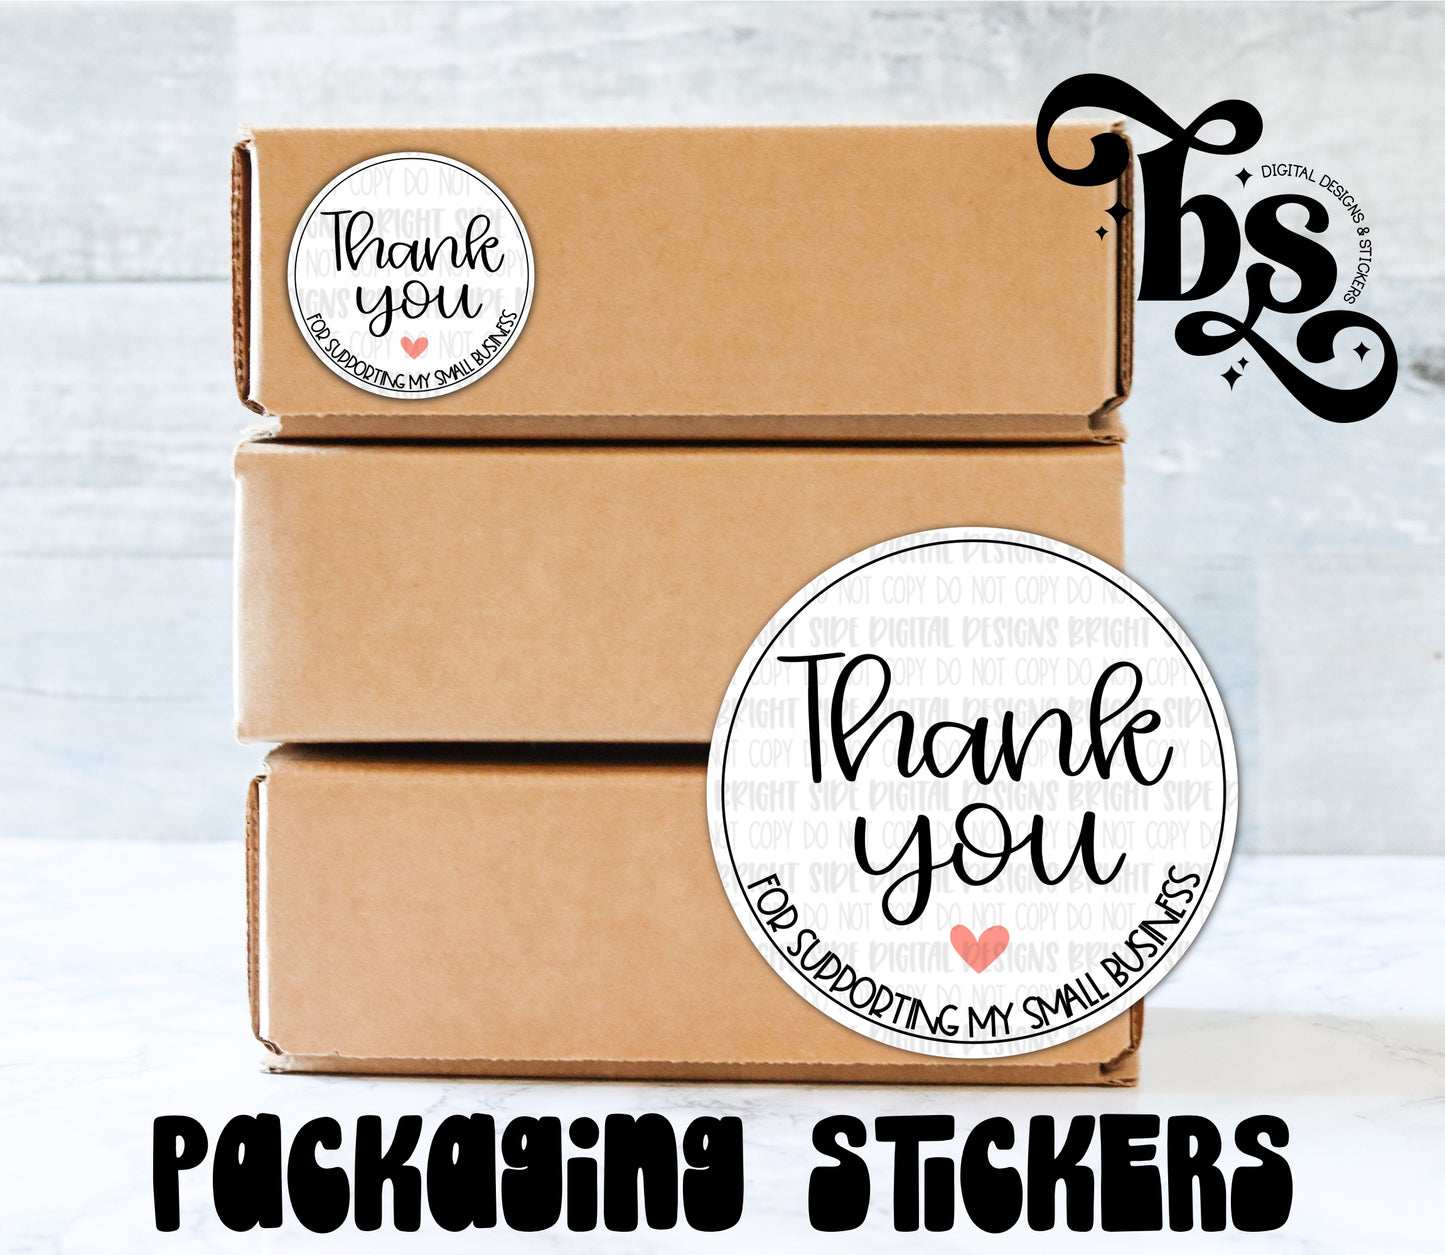 Thank you for your order -Round simple packaging sticker